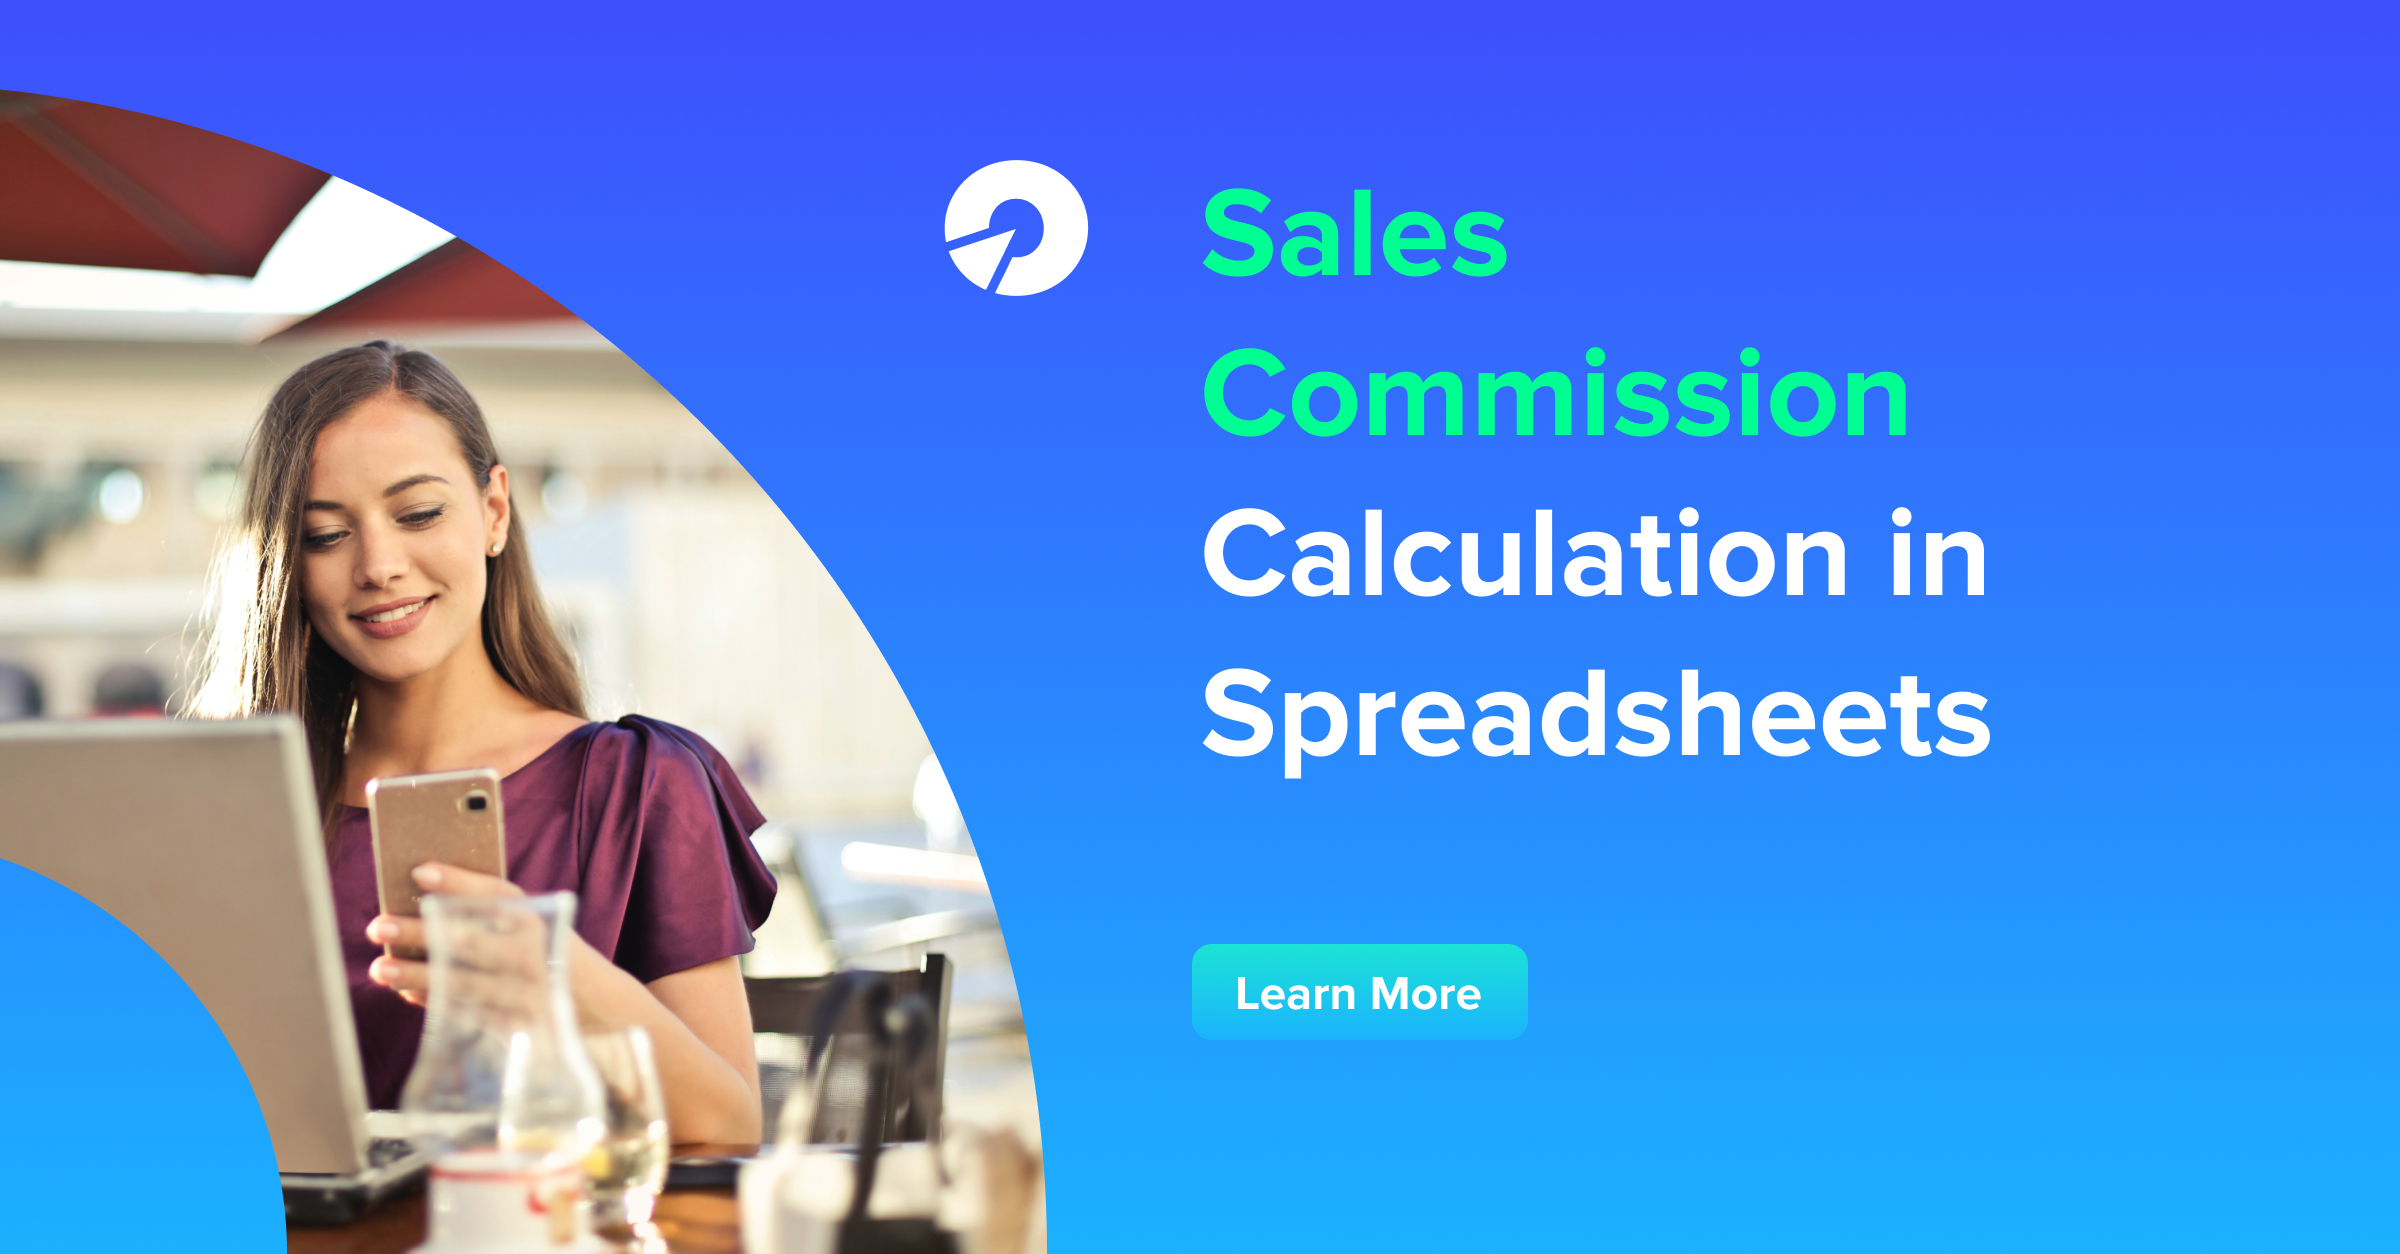 Sales Commission Calculation in Spreadsheets